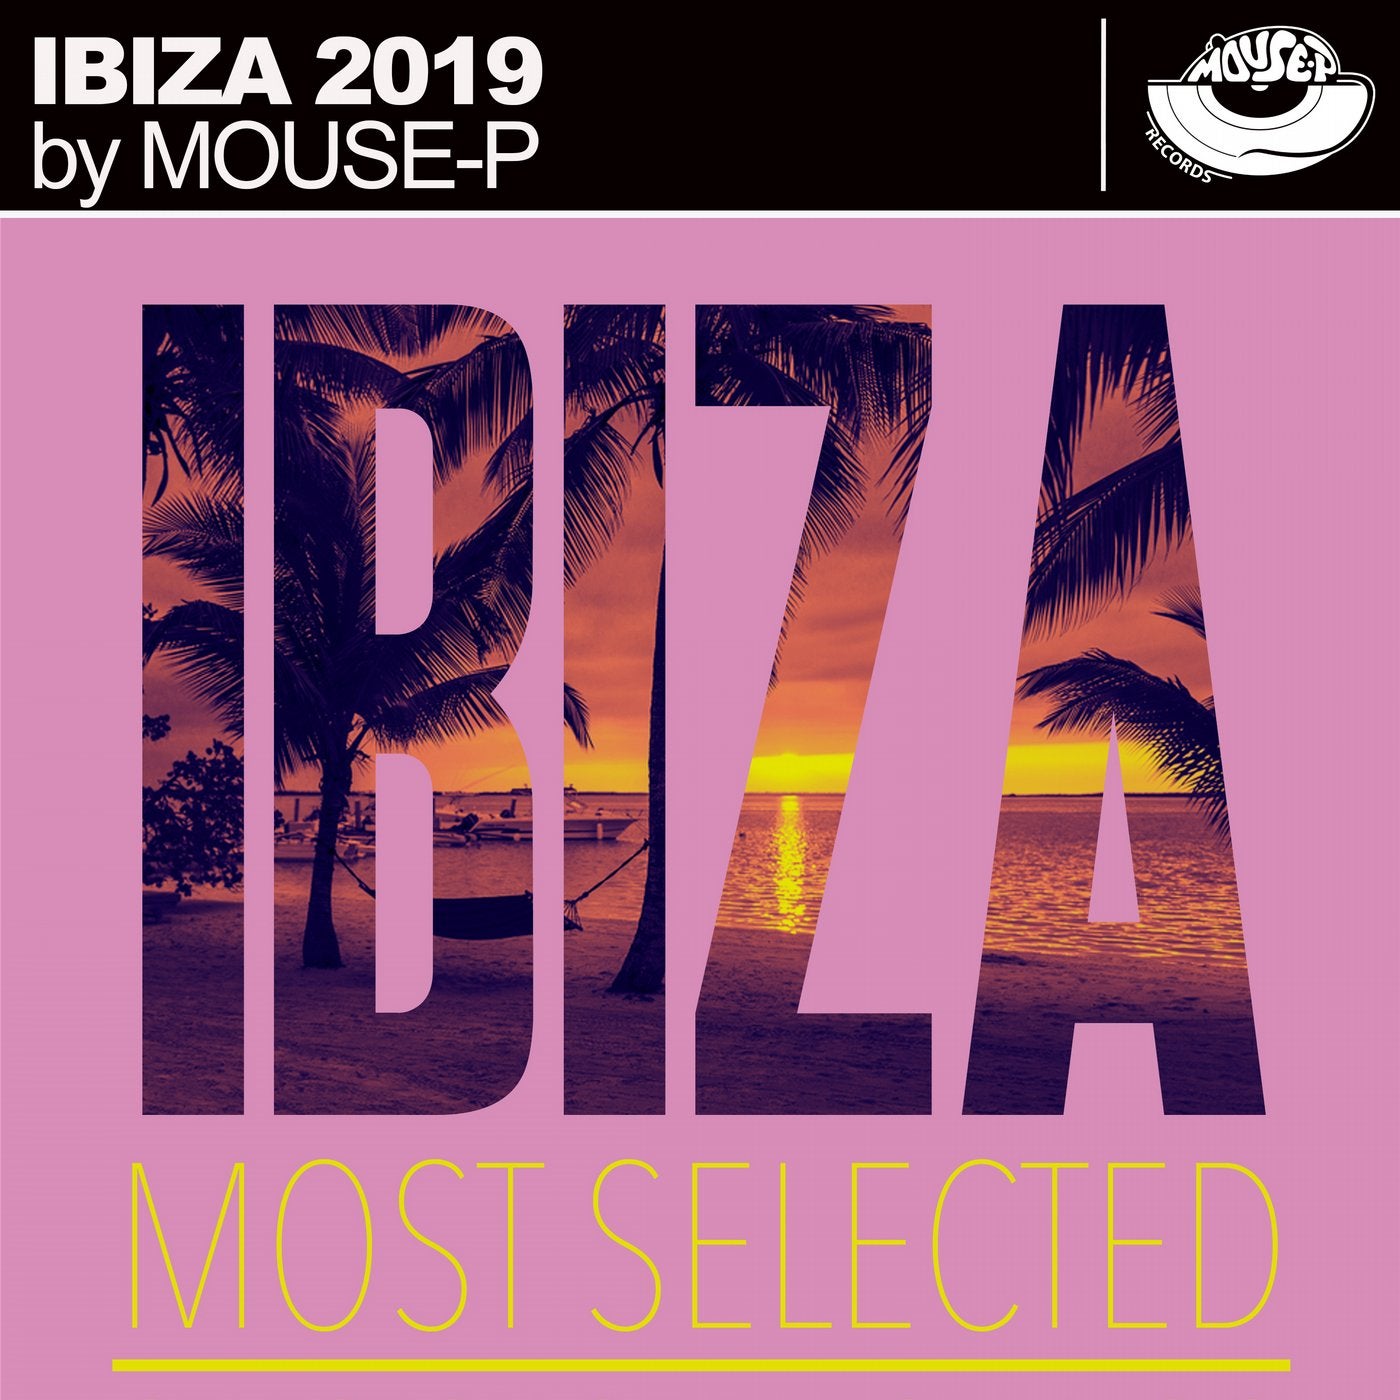 Ibiza 2019 by Mouse-P